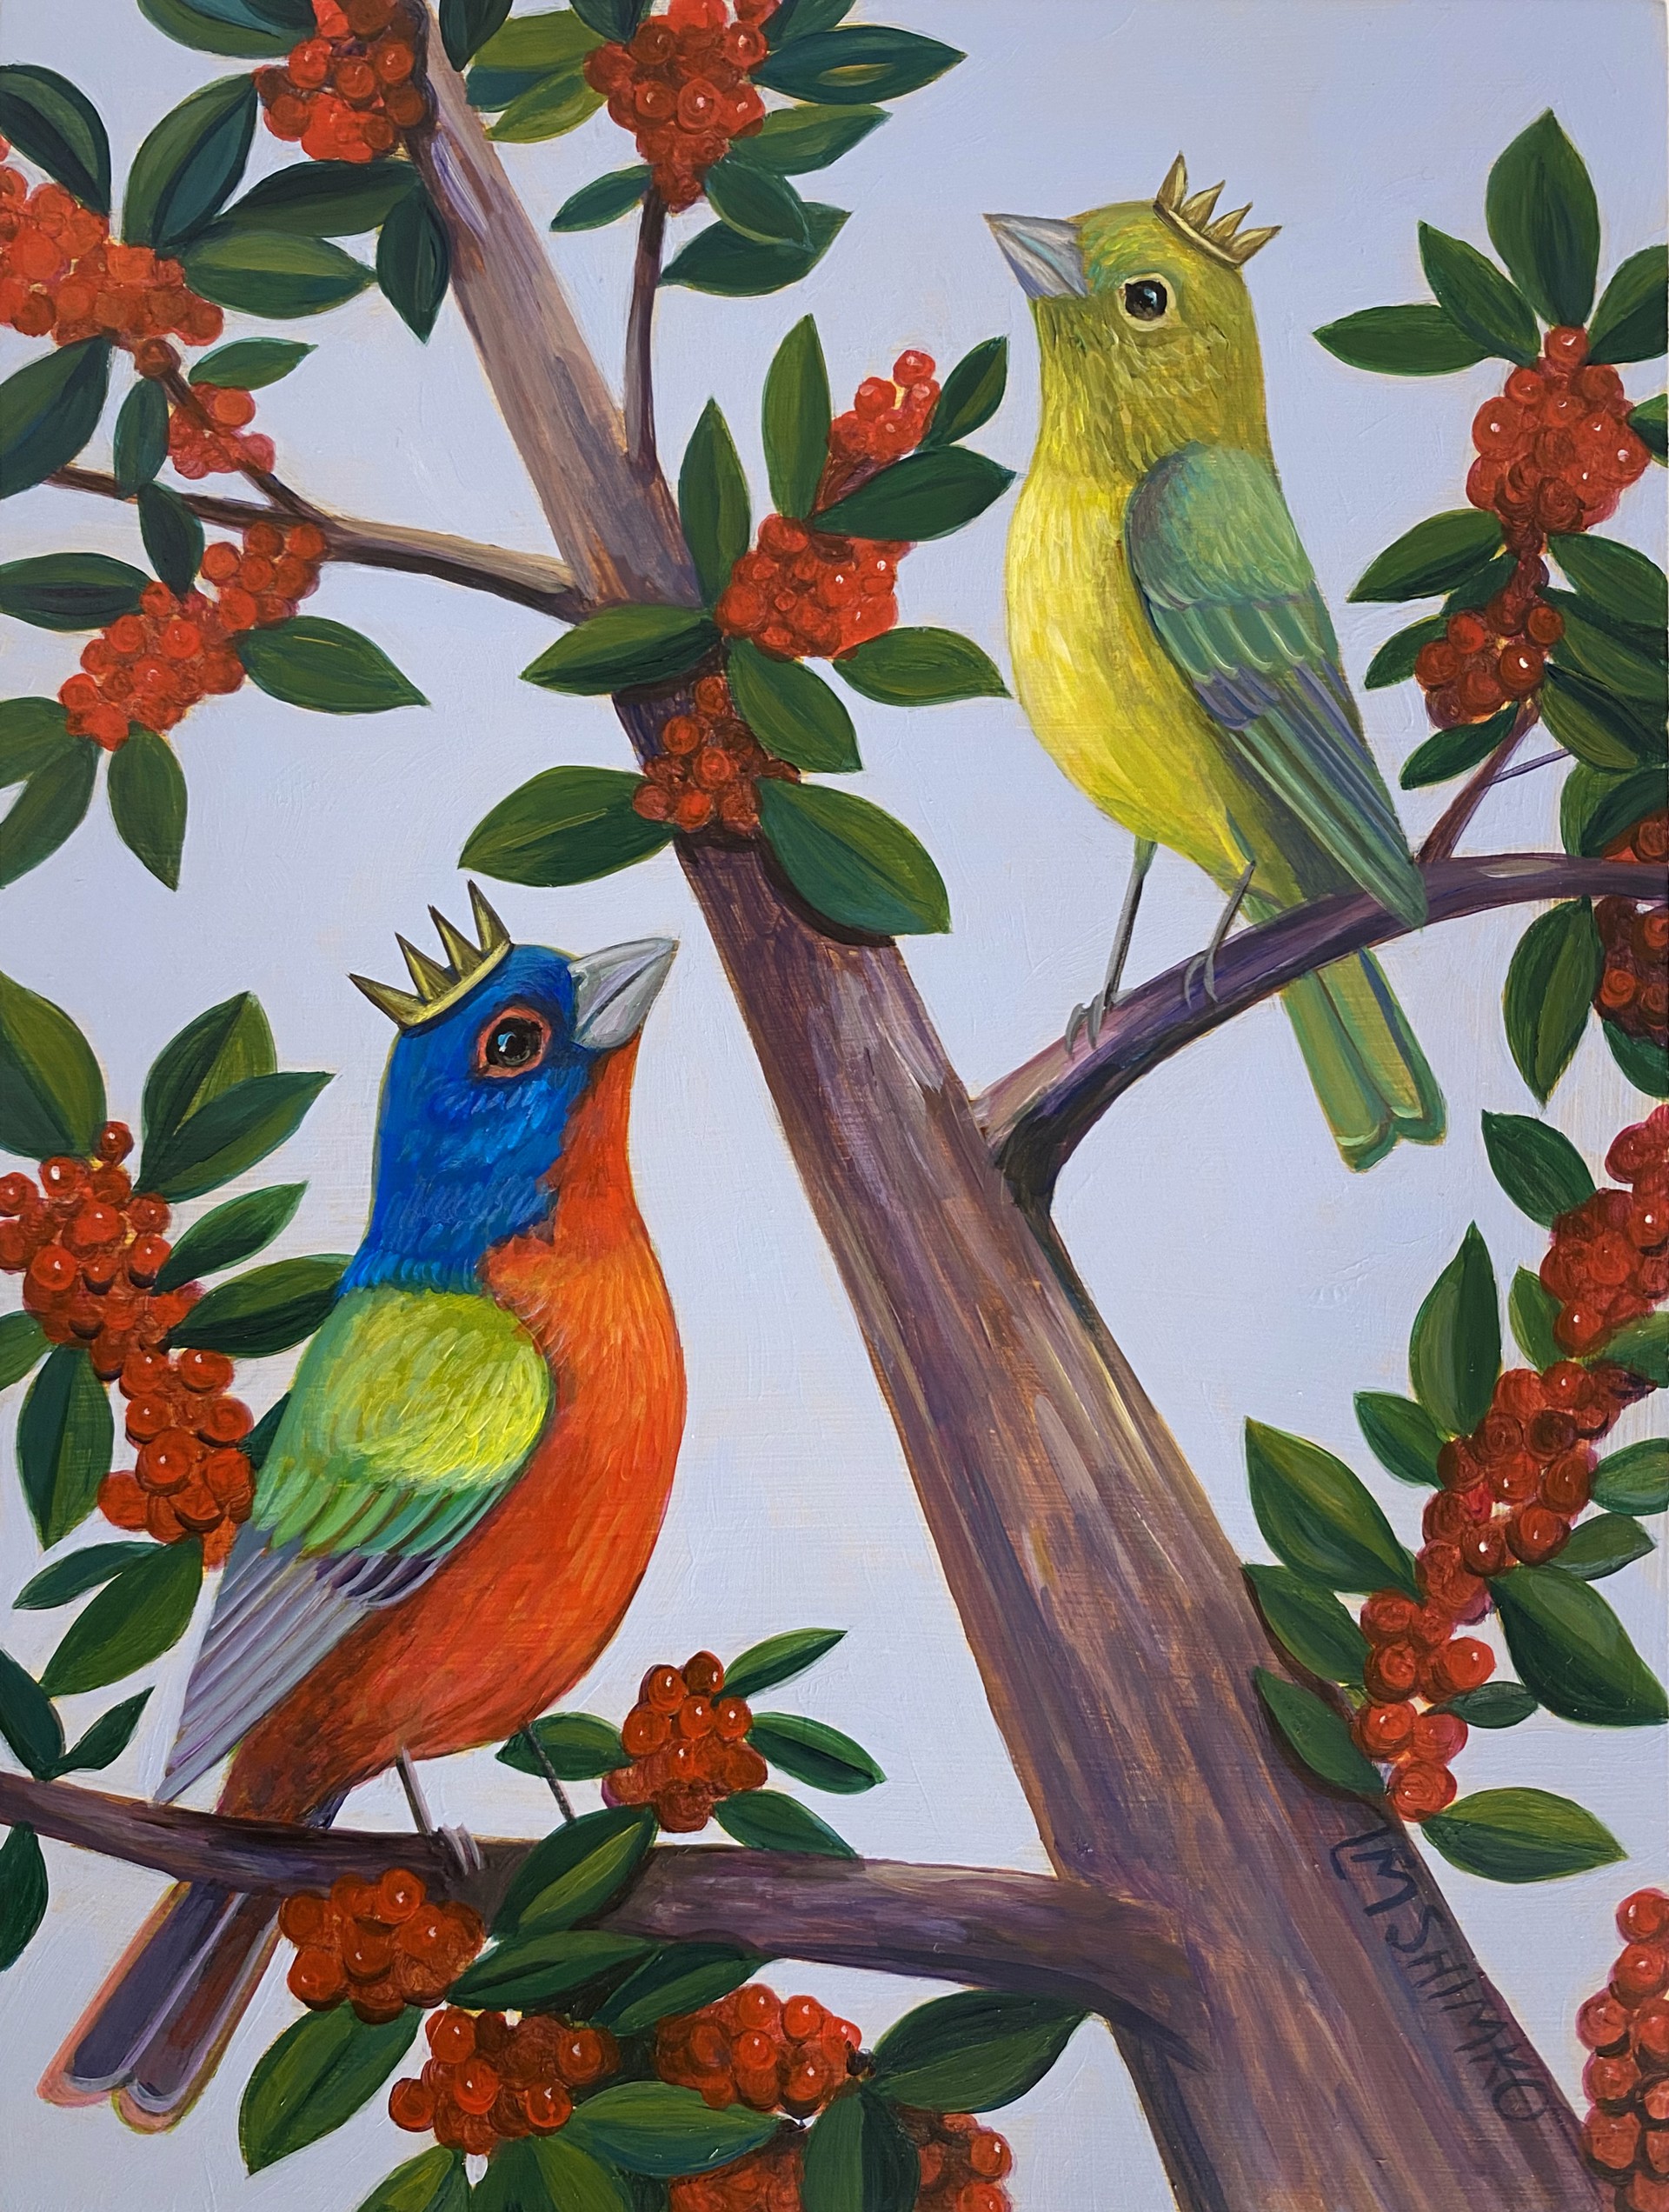 Painted Bunting Queen & King Yaupon Berry by Lisa Shimko